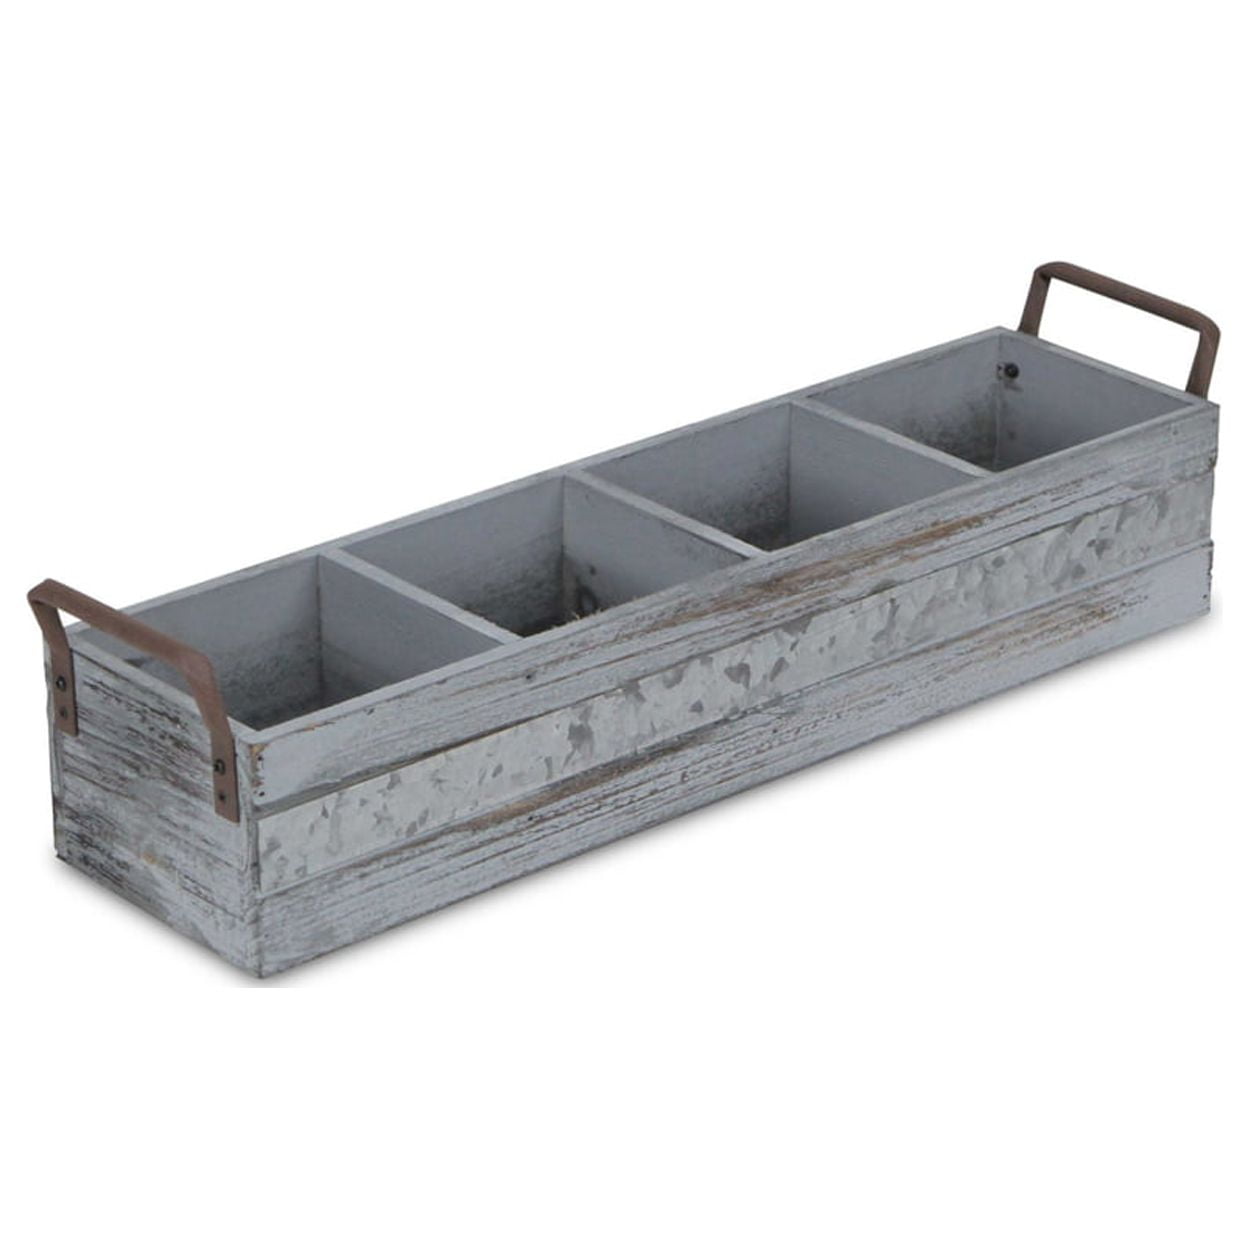 Fp-3879gw Gray Wash Wooden 4 Slot Storage Caddy With Side Metal Handles & Center Galvanized Accent